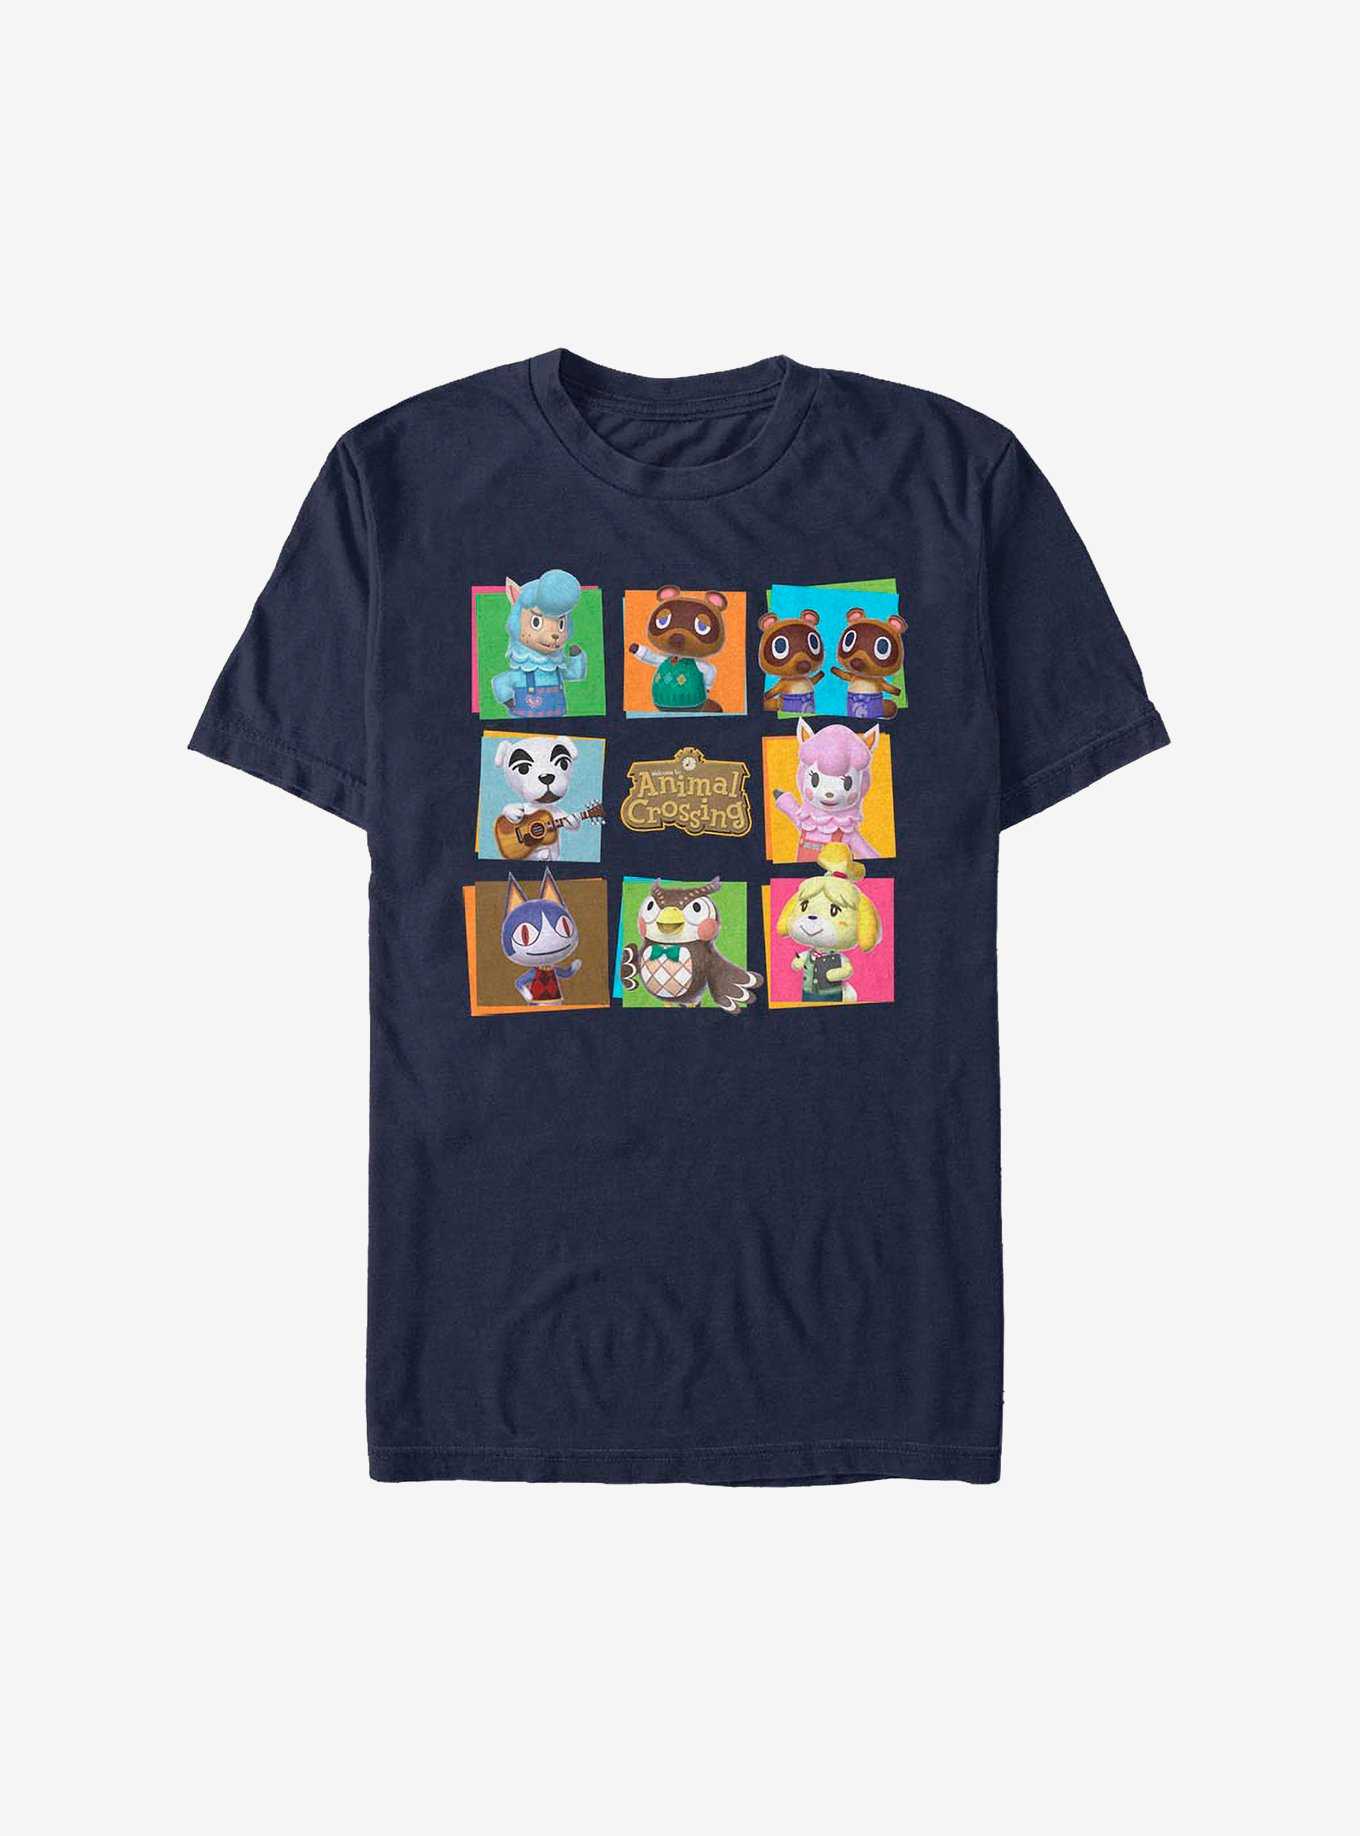 OFFICIAL Animal Crossing Shirts, Merch, & Gifts